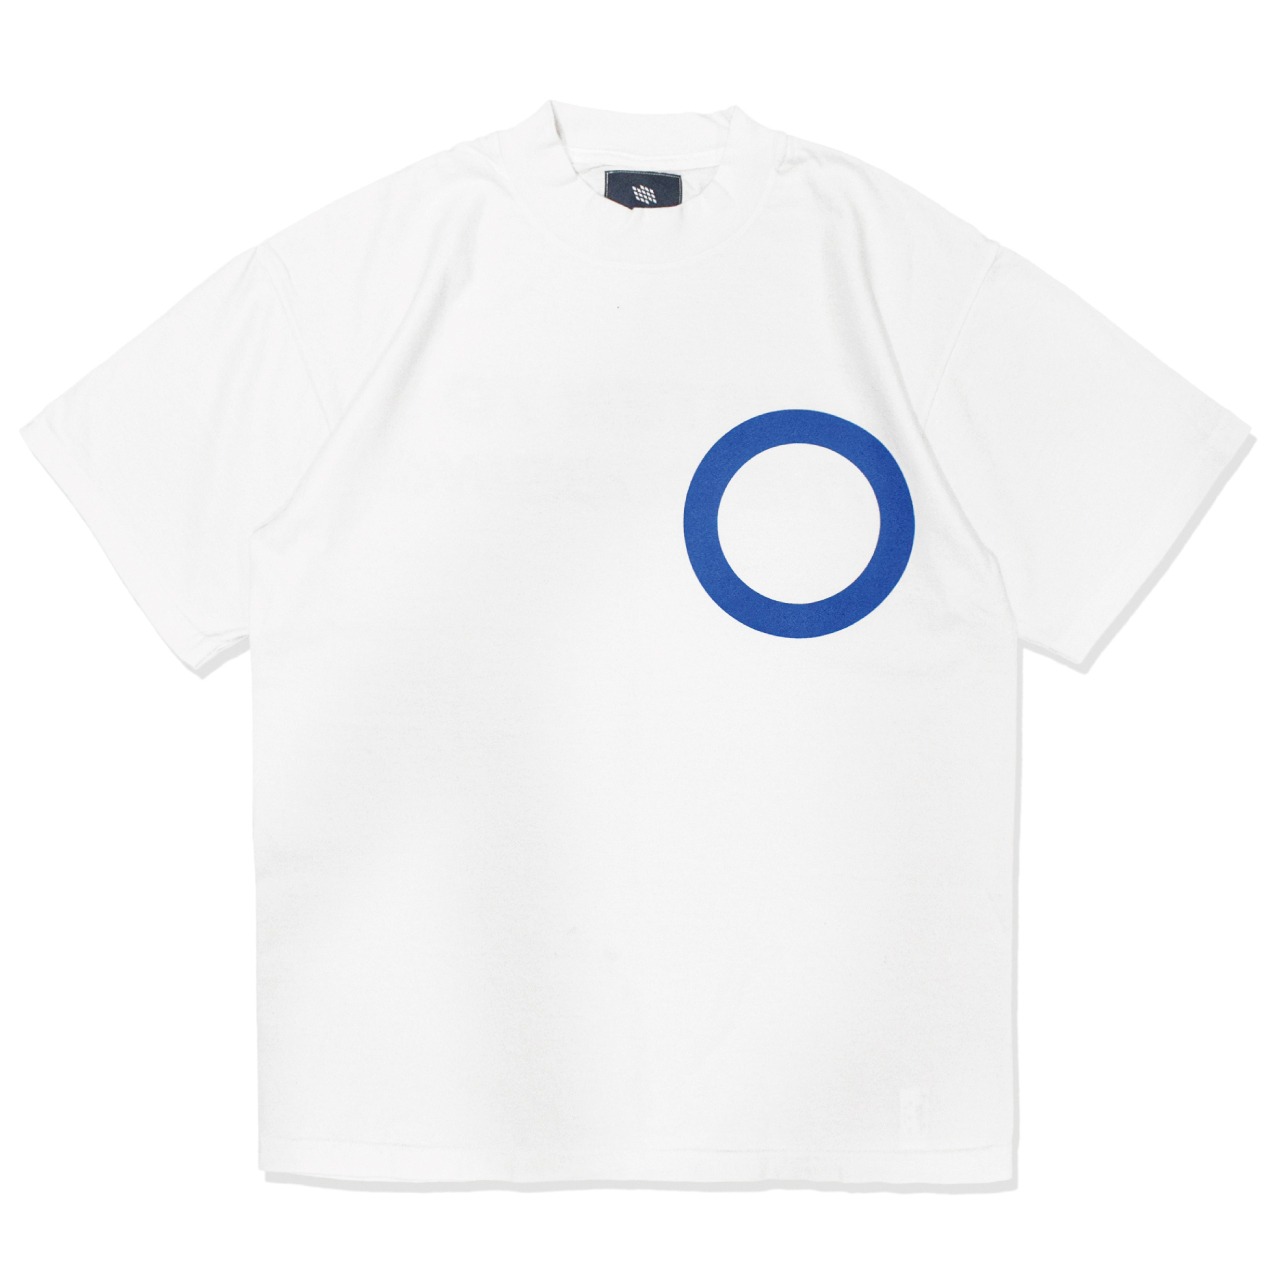 Germs Tee Shirts - White